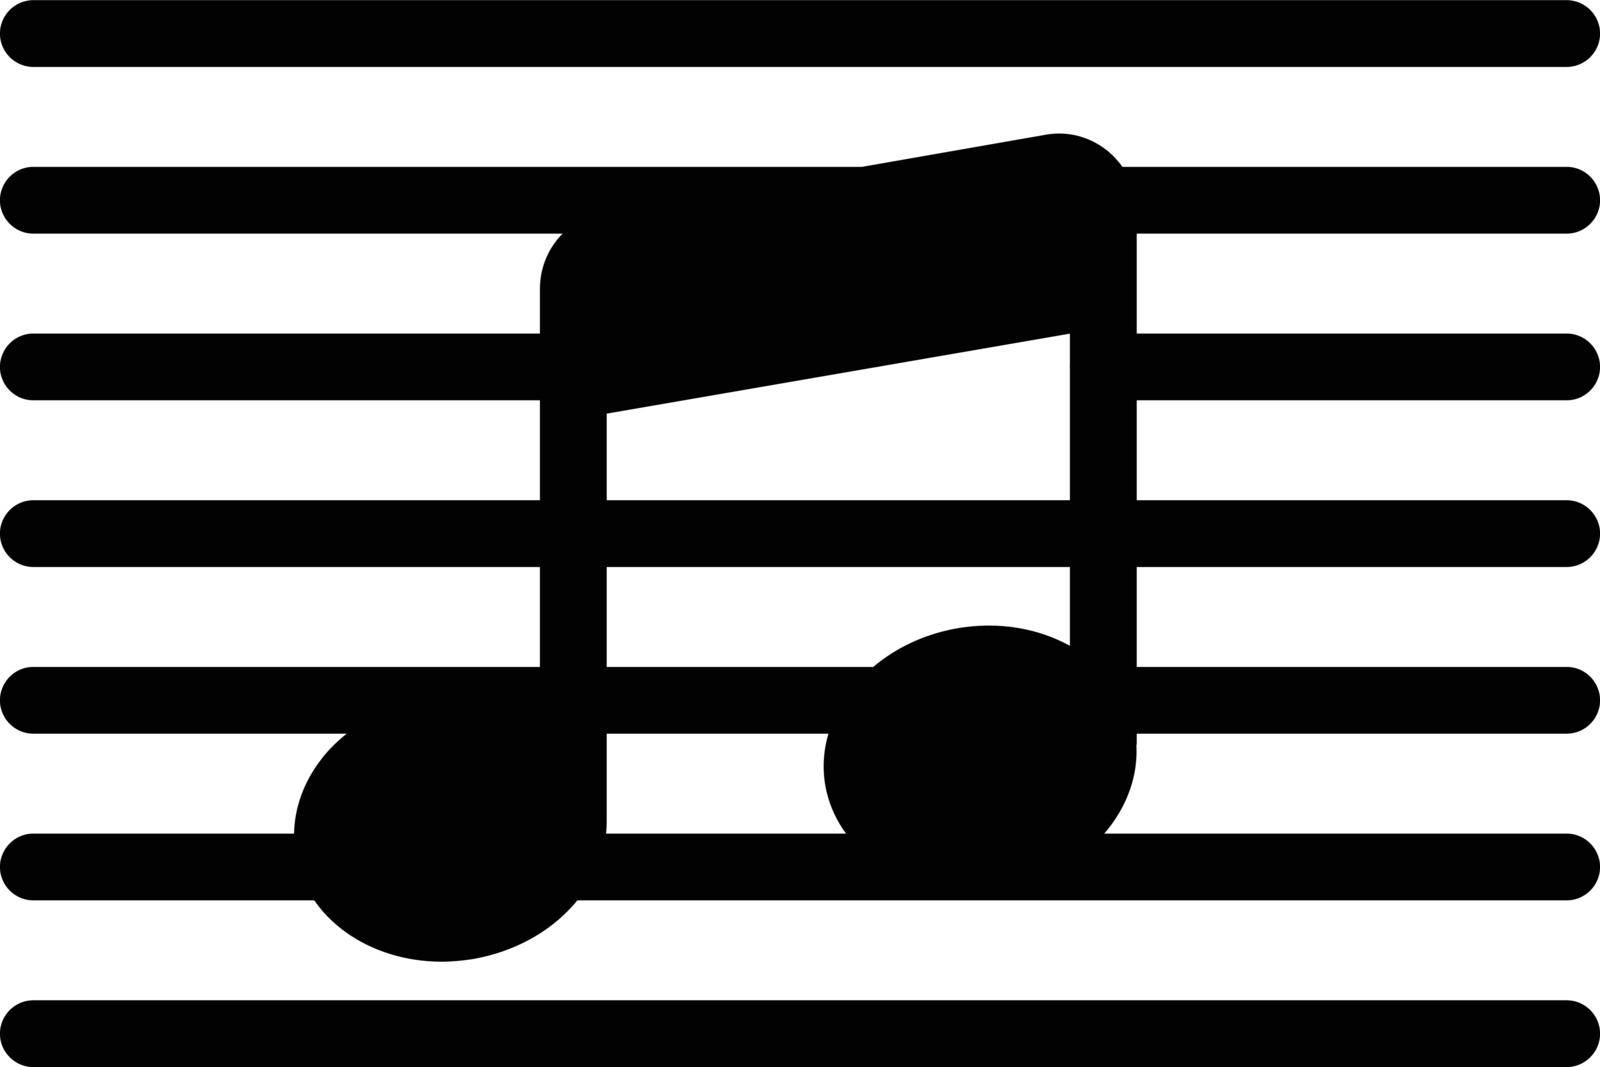 music Vector illustration on a transparent background. Premium quality symmbols. Glyphs vector icons for concept and graphic design.